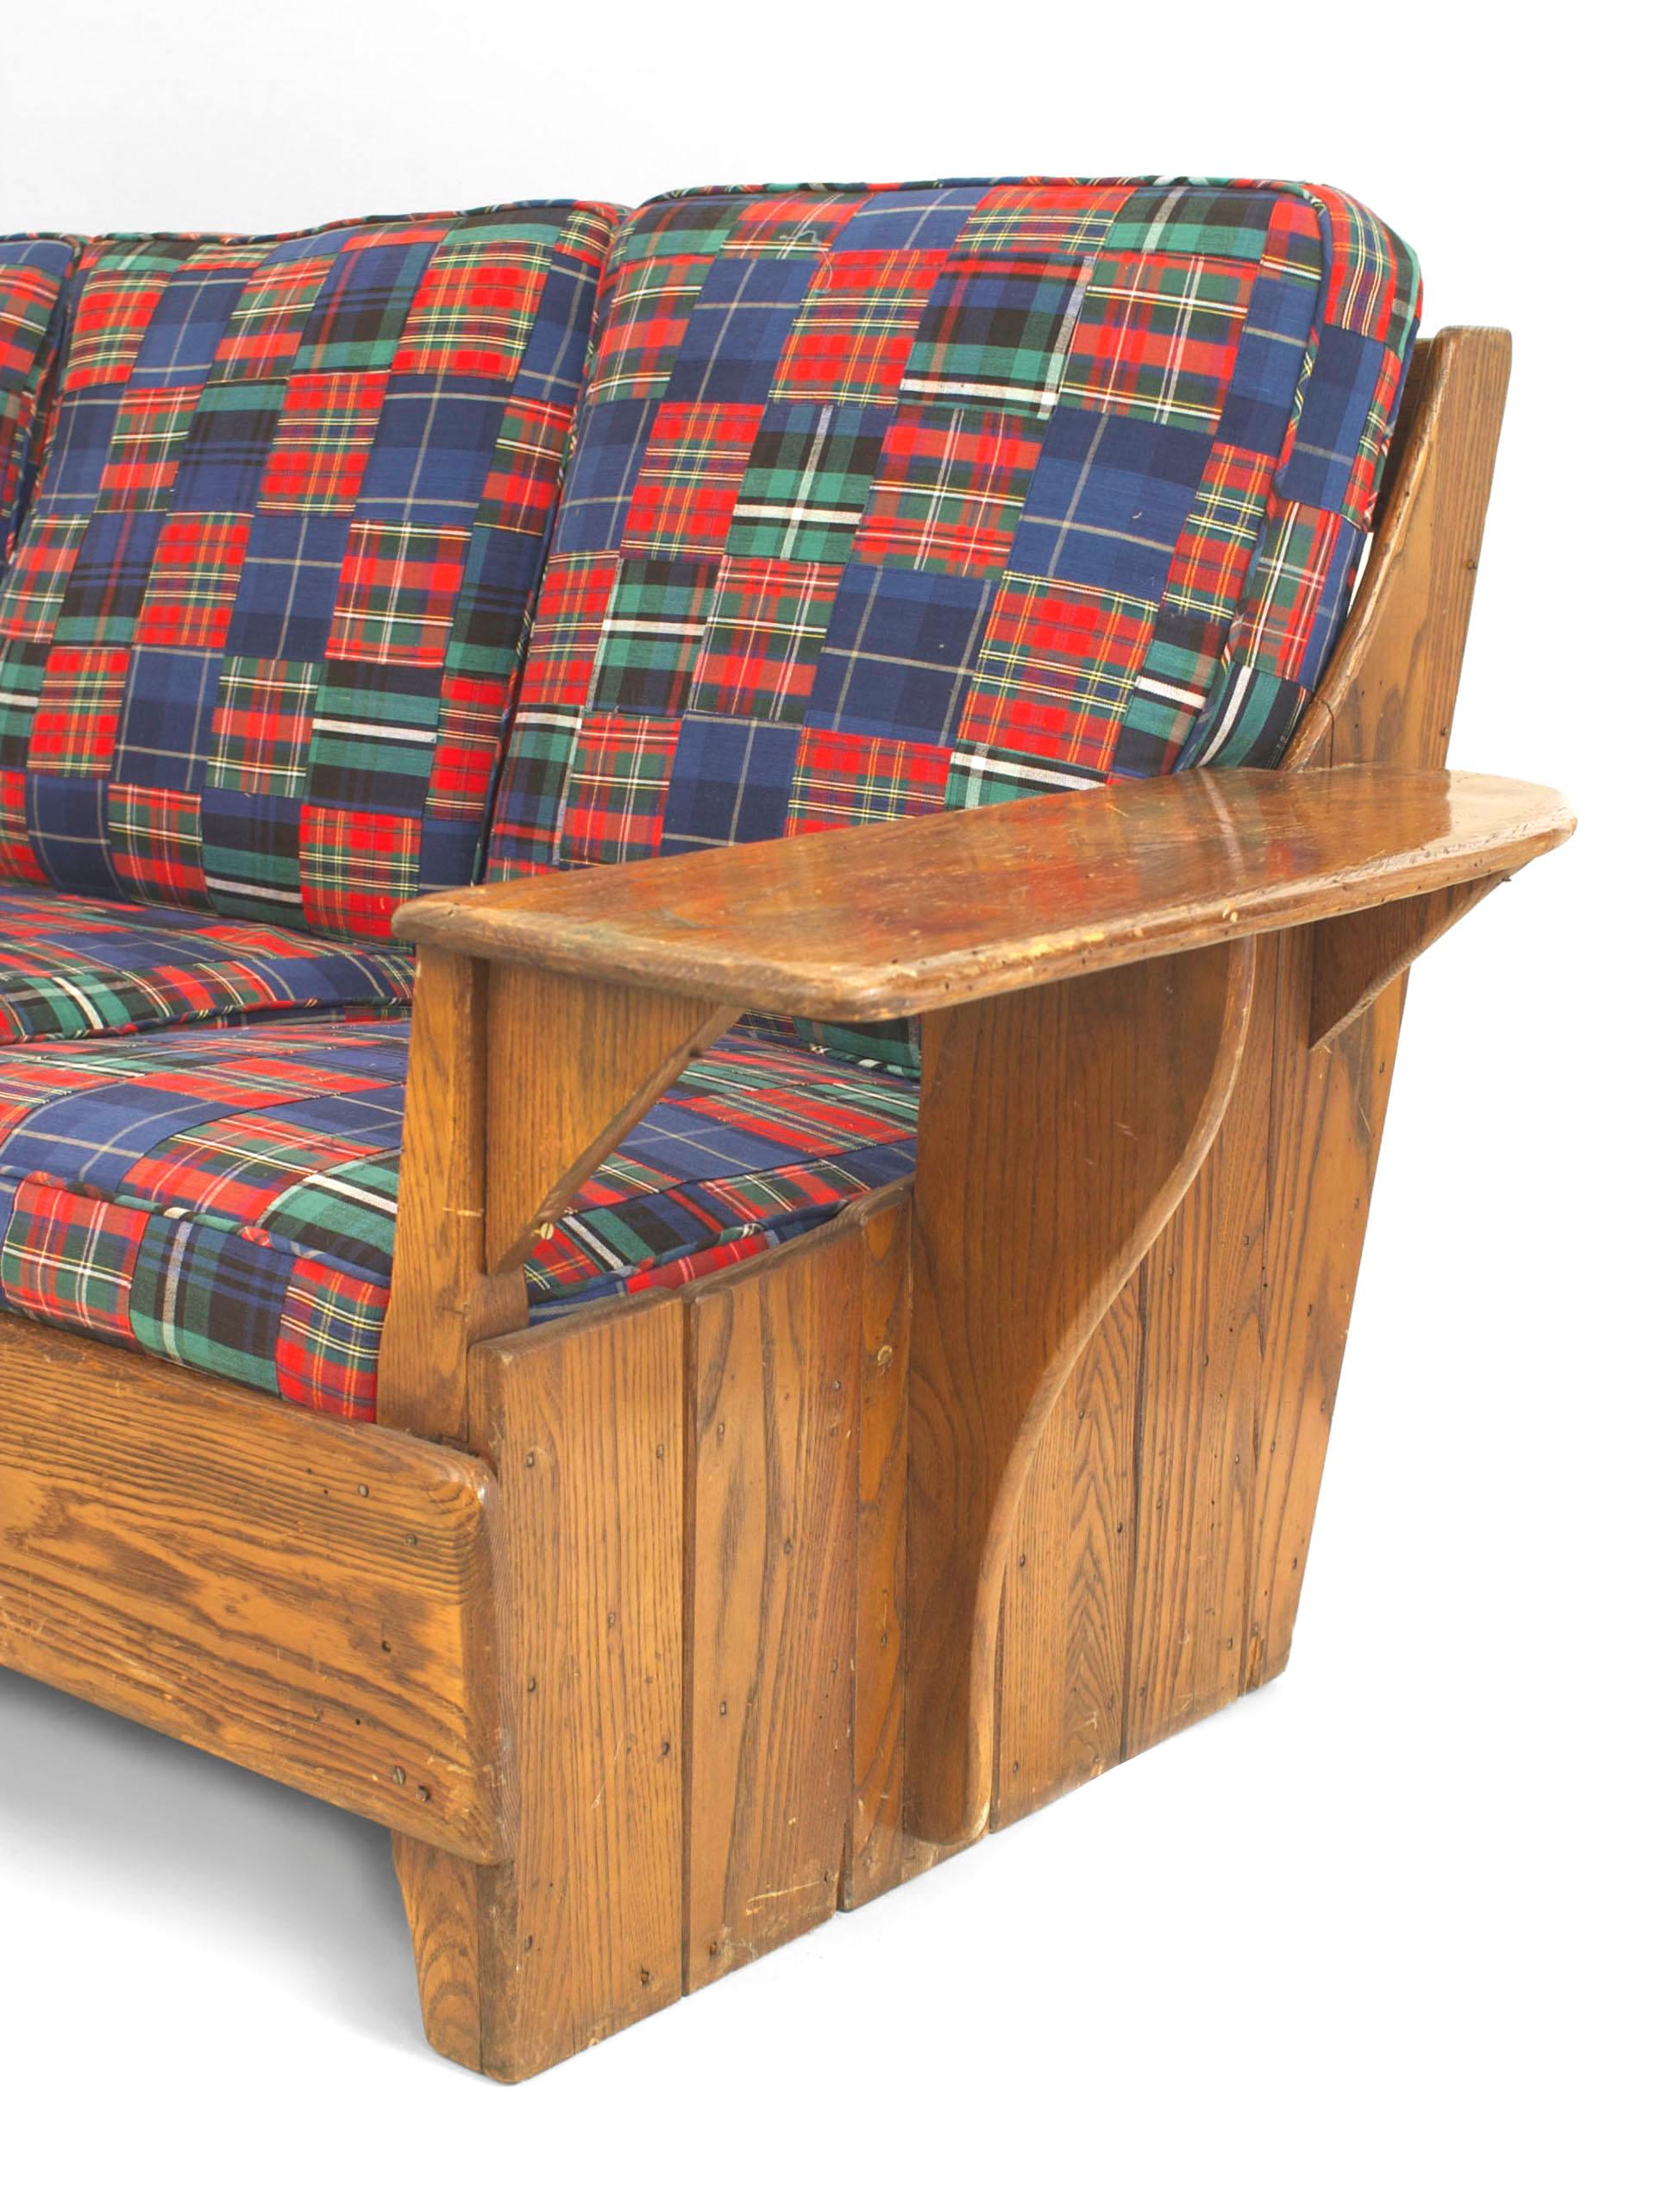 American Rustic Old Hickory Mission style settee with wide flat panel arms & a slat back having 6 plaid upholstered cushions. (American Provincial label; OLD HICKORY brand) Lg. arm: 060718, 2 tub arms: 060719, 2 HB. arm: 060720
